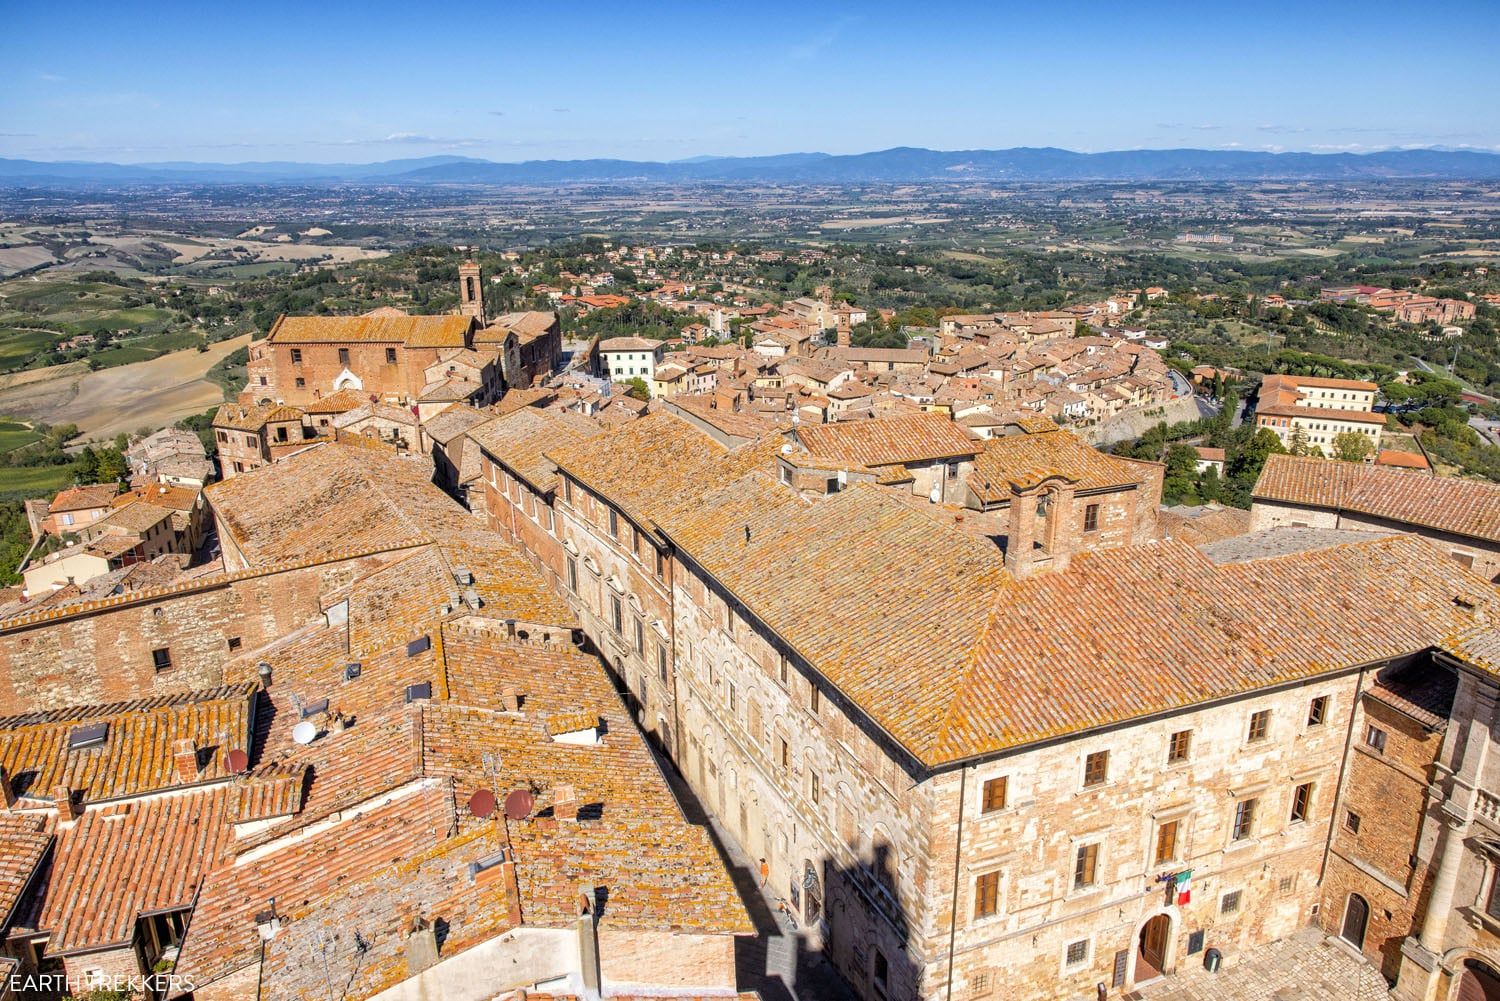 How to Visit Montepulciano | Best Things to Do in Montepulciano